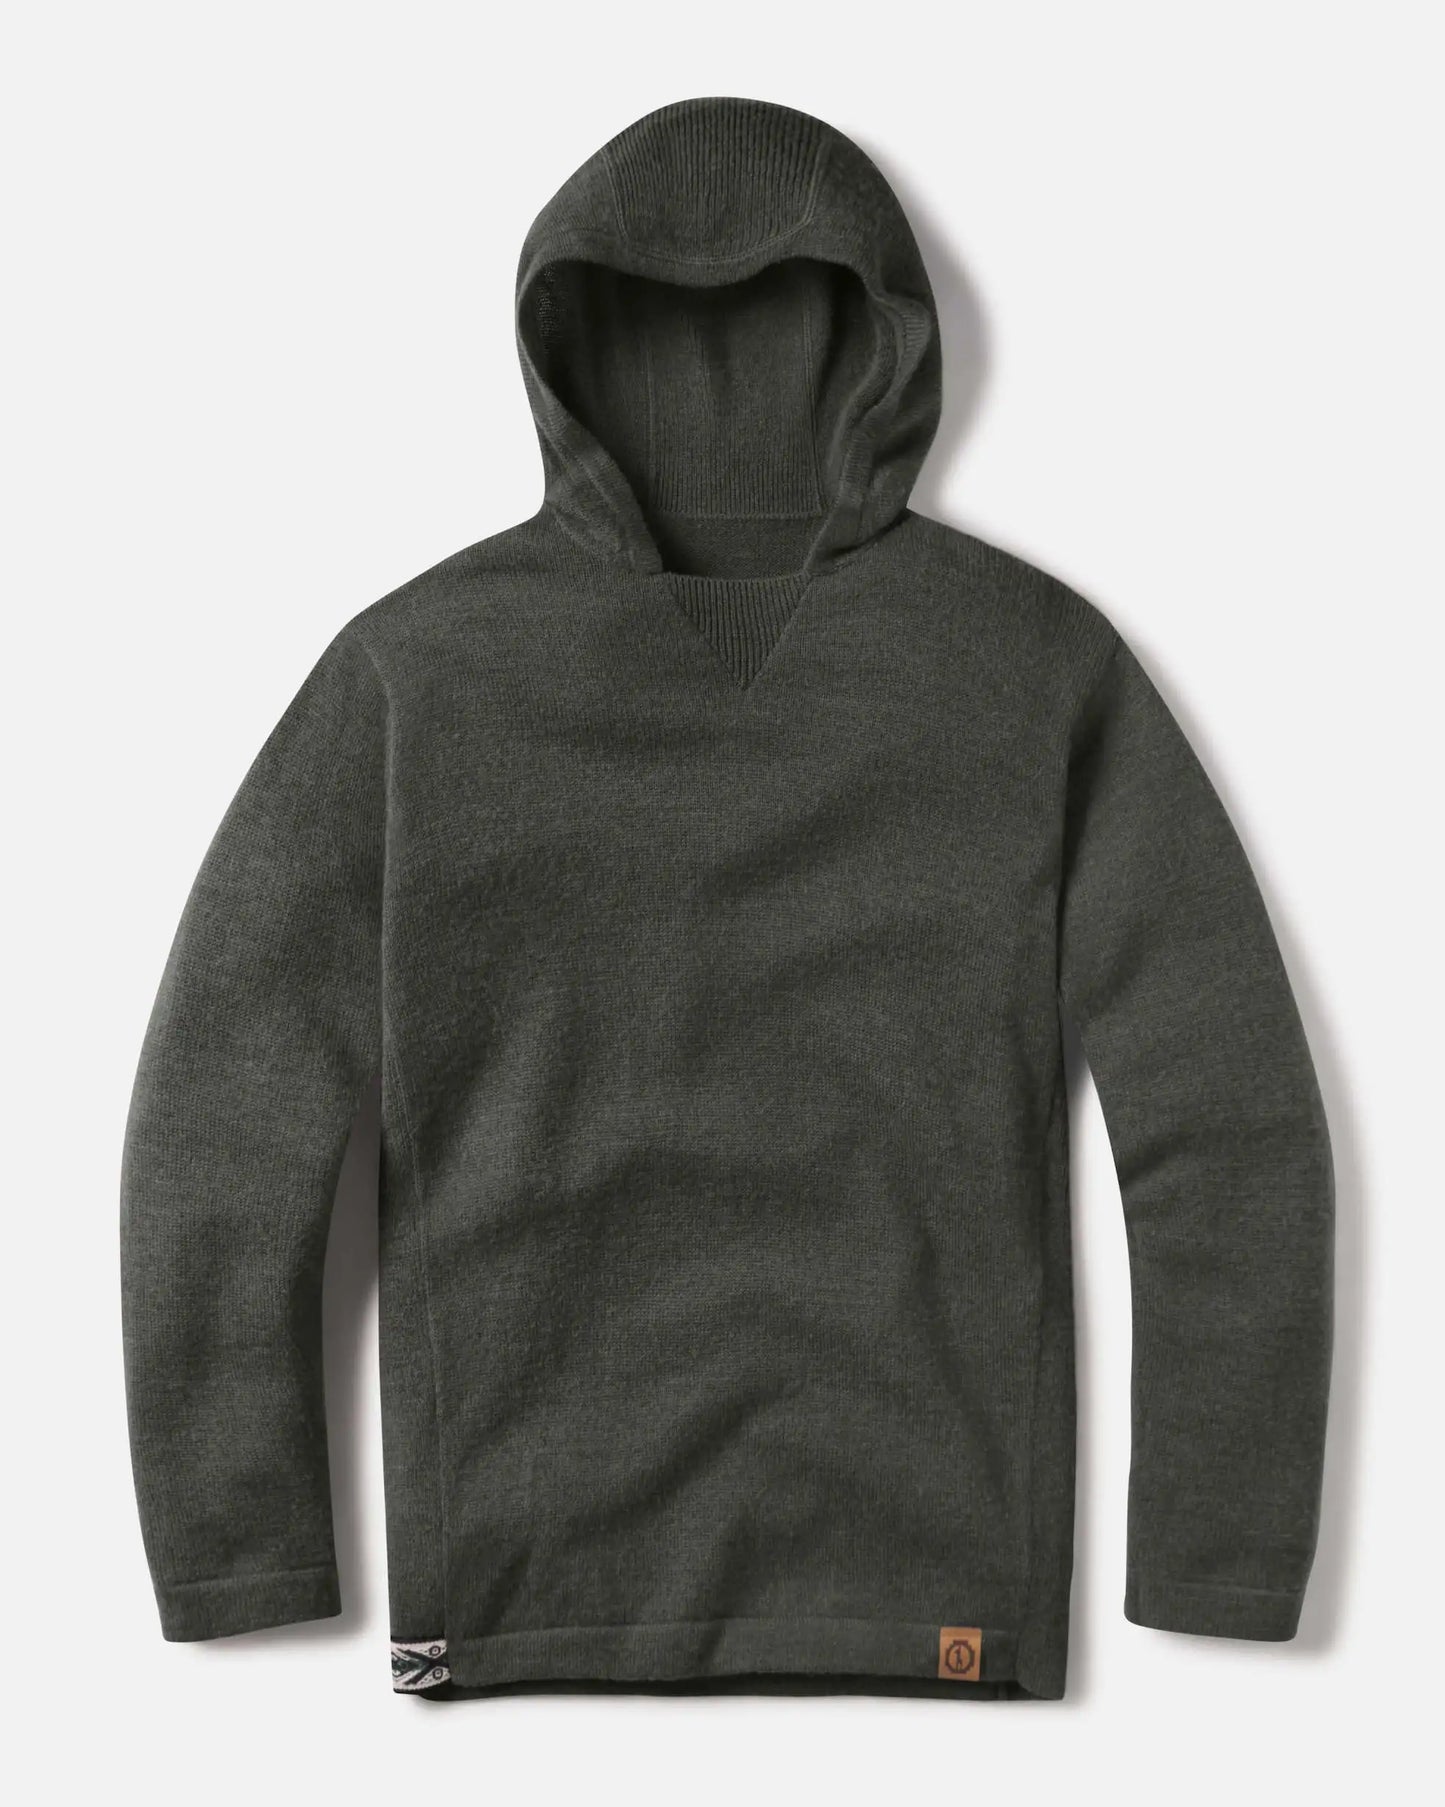 15 Best Travel Hoodies for a Cozy Journey